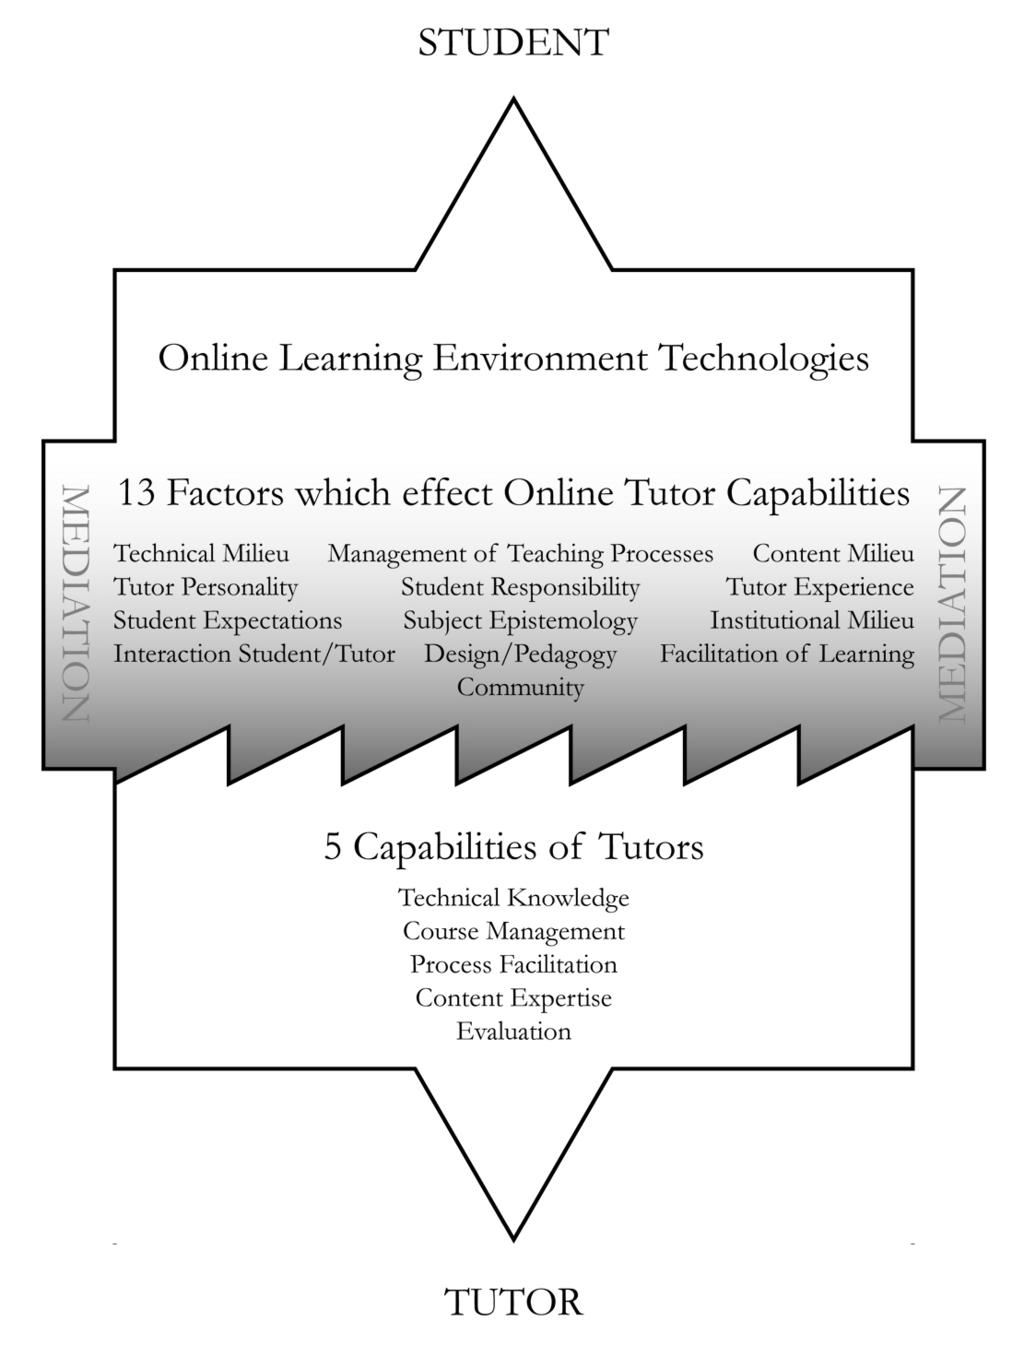 Figure 2: The Reid / Newhouse model of the mediated relationships between online tutor capabilities and the environmental factors which affect them Technical Milieu.